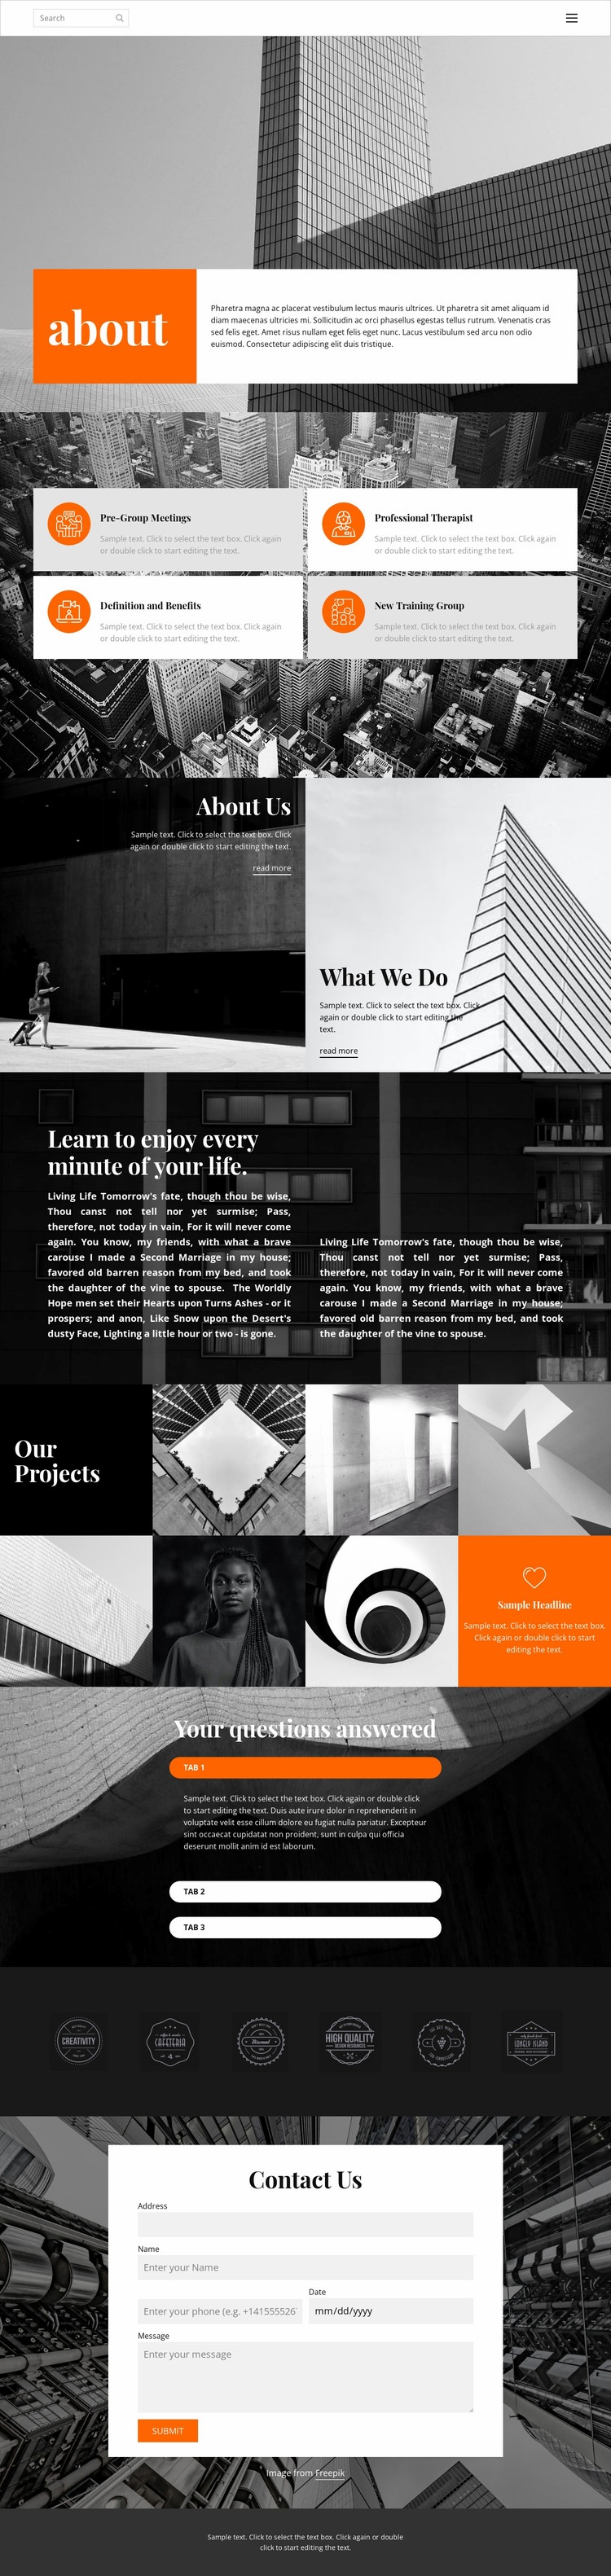 New projects studio Web Page Design